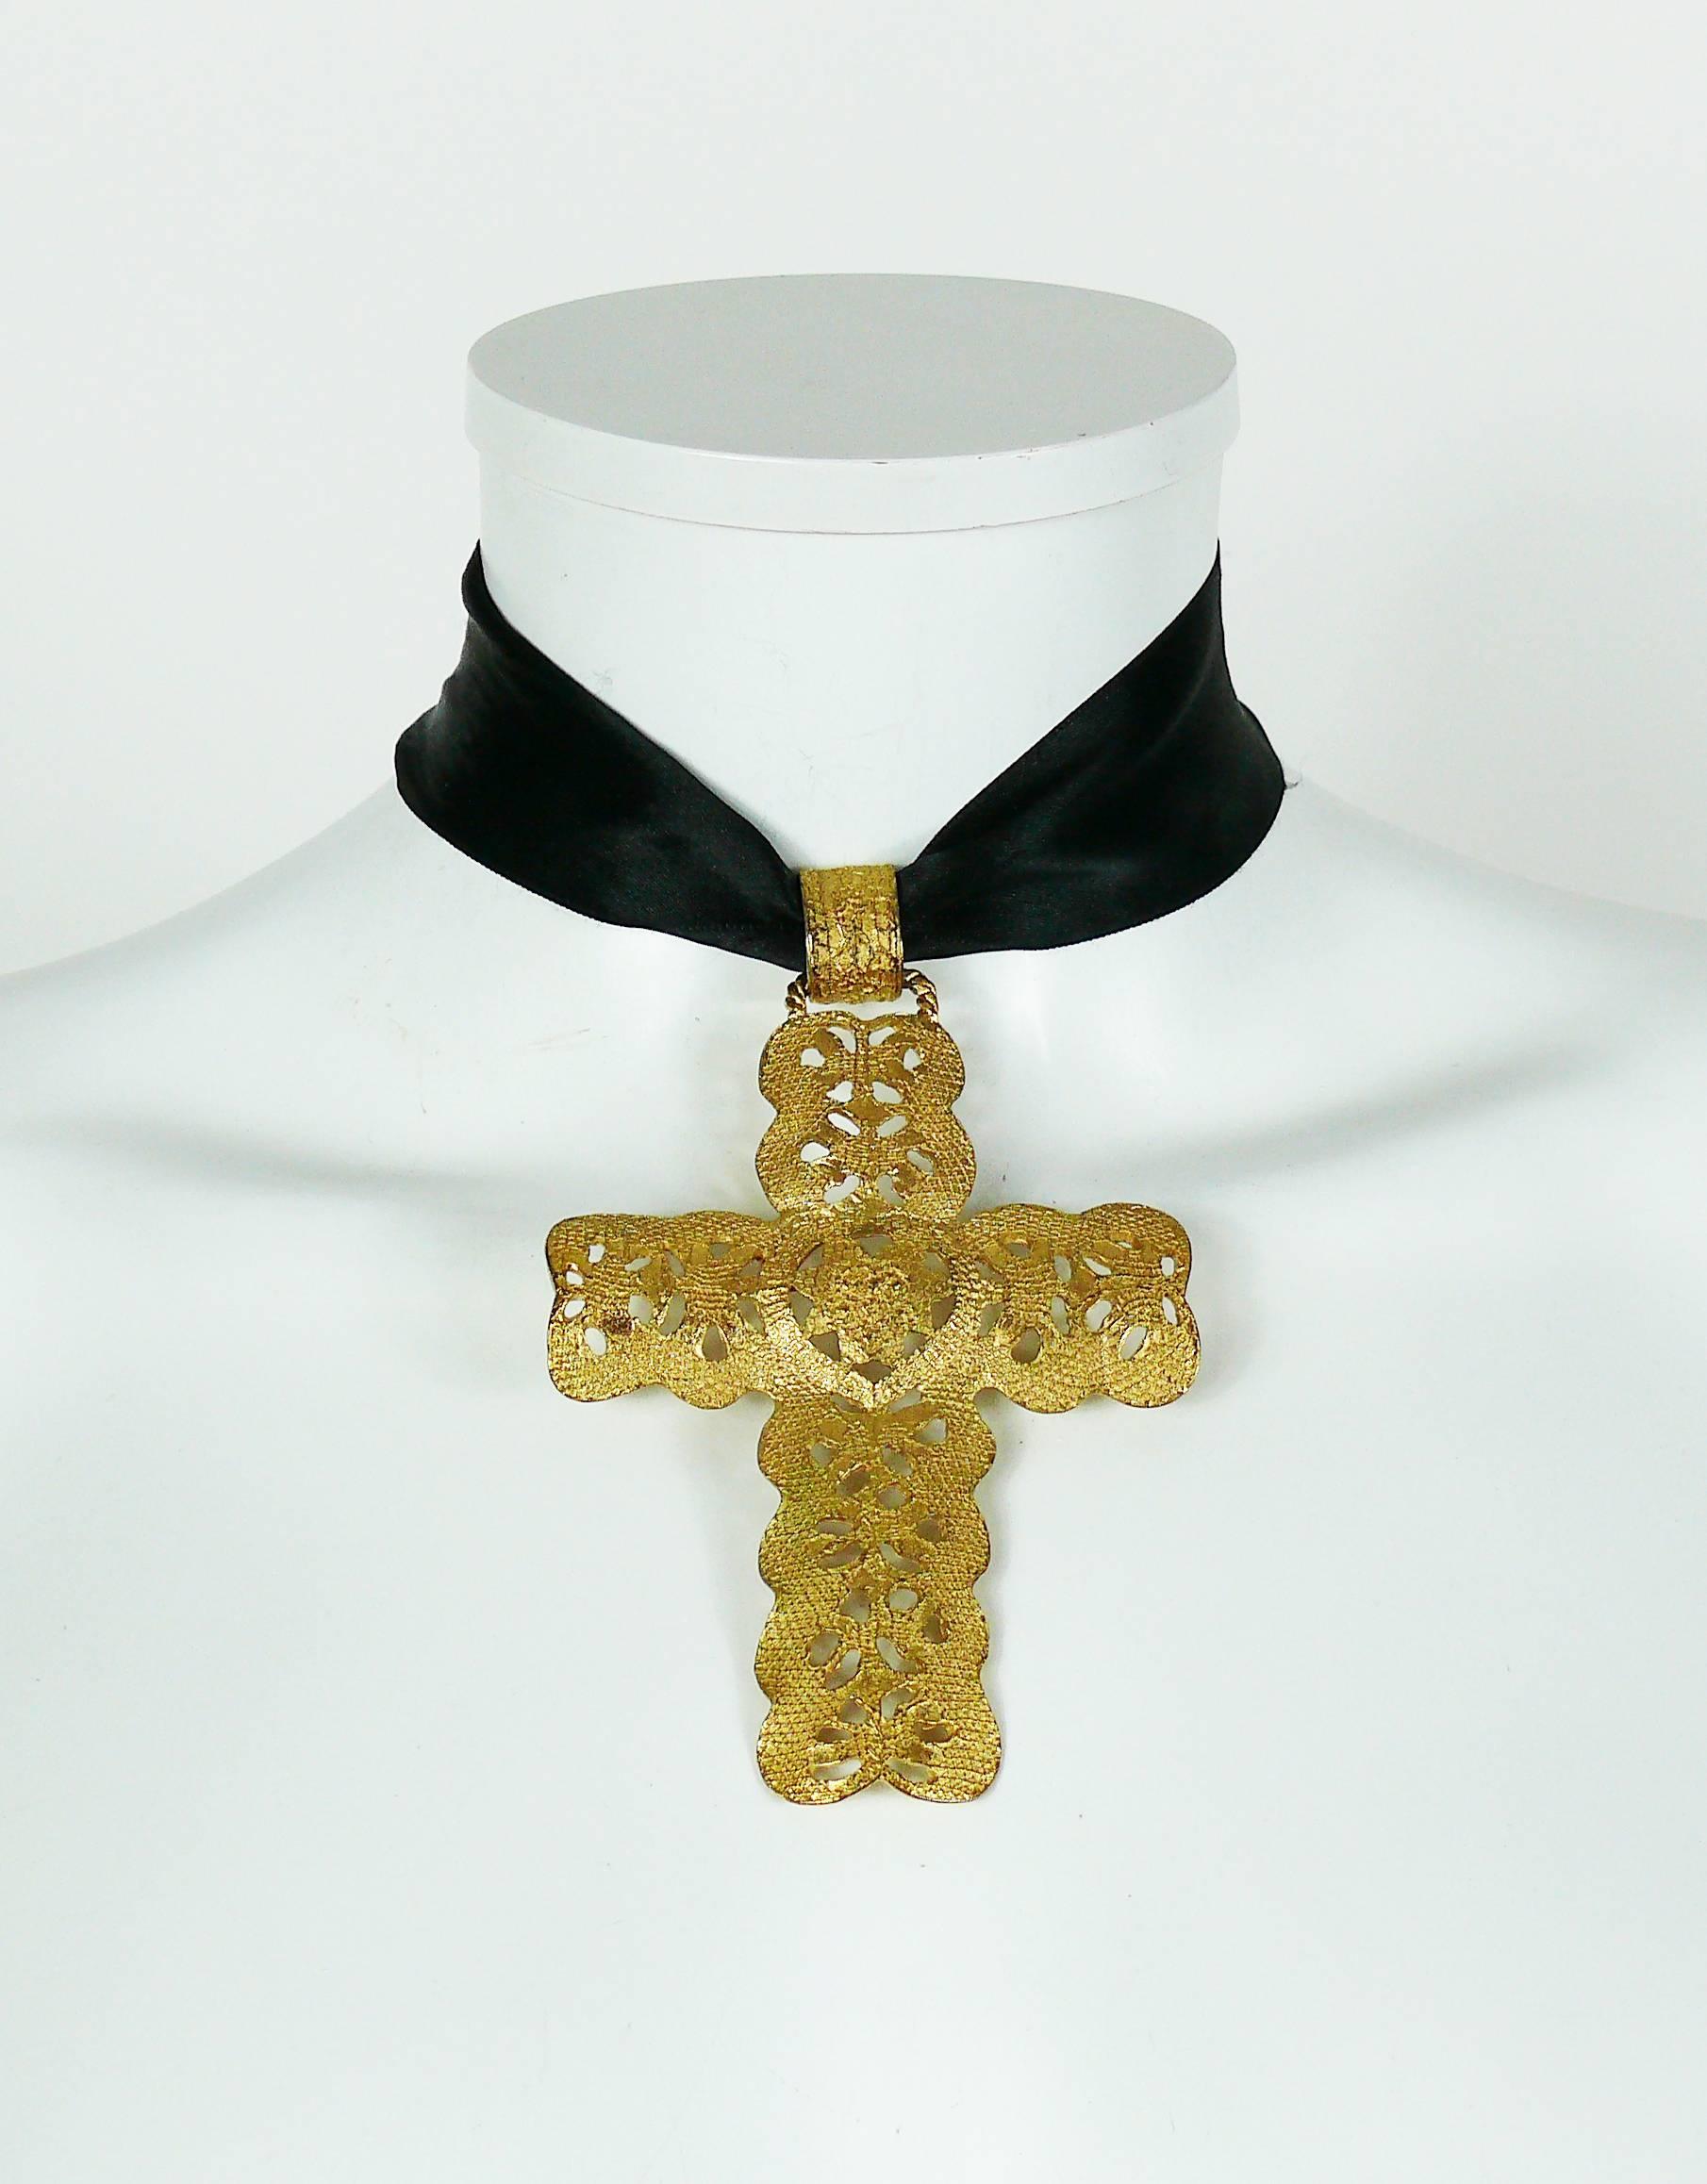 YVES SAINT LAURENT vintage rare gold toned openwork massive cross pendant featuring a lace design.

Comes with a black satin ribbon and original dust bag (used condition).

Embossed YSL Made in France.

Indicative measurements : cross height (incl.